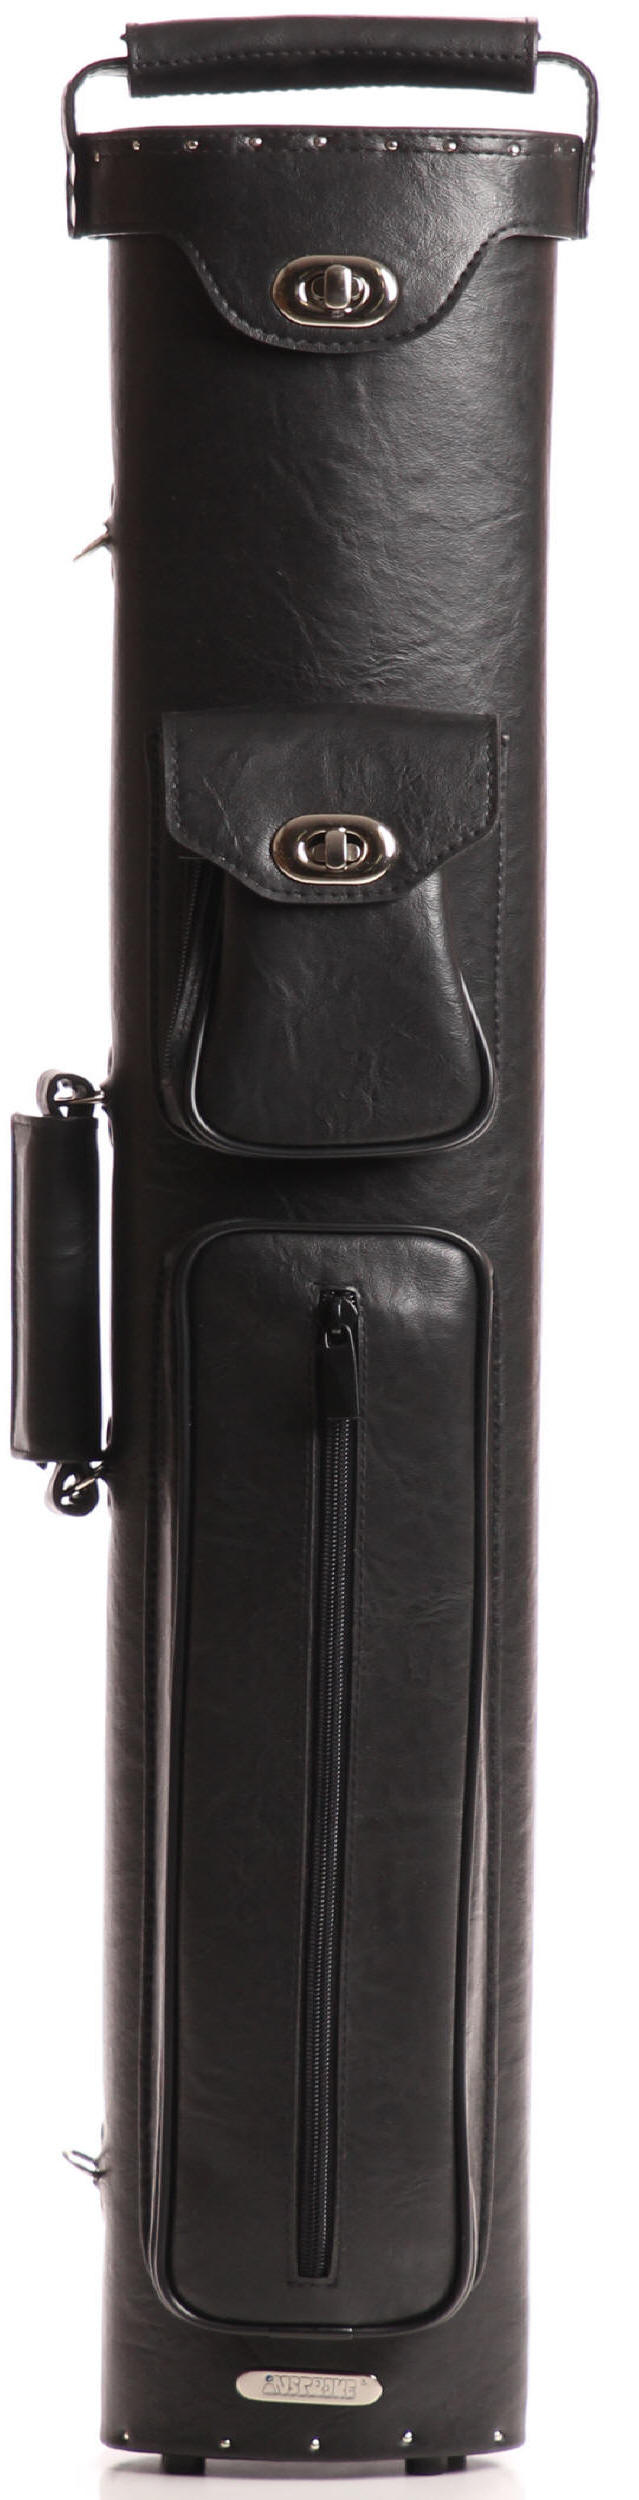 Imperial Premier Black Cue Case Hard Tube with Strap 